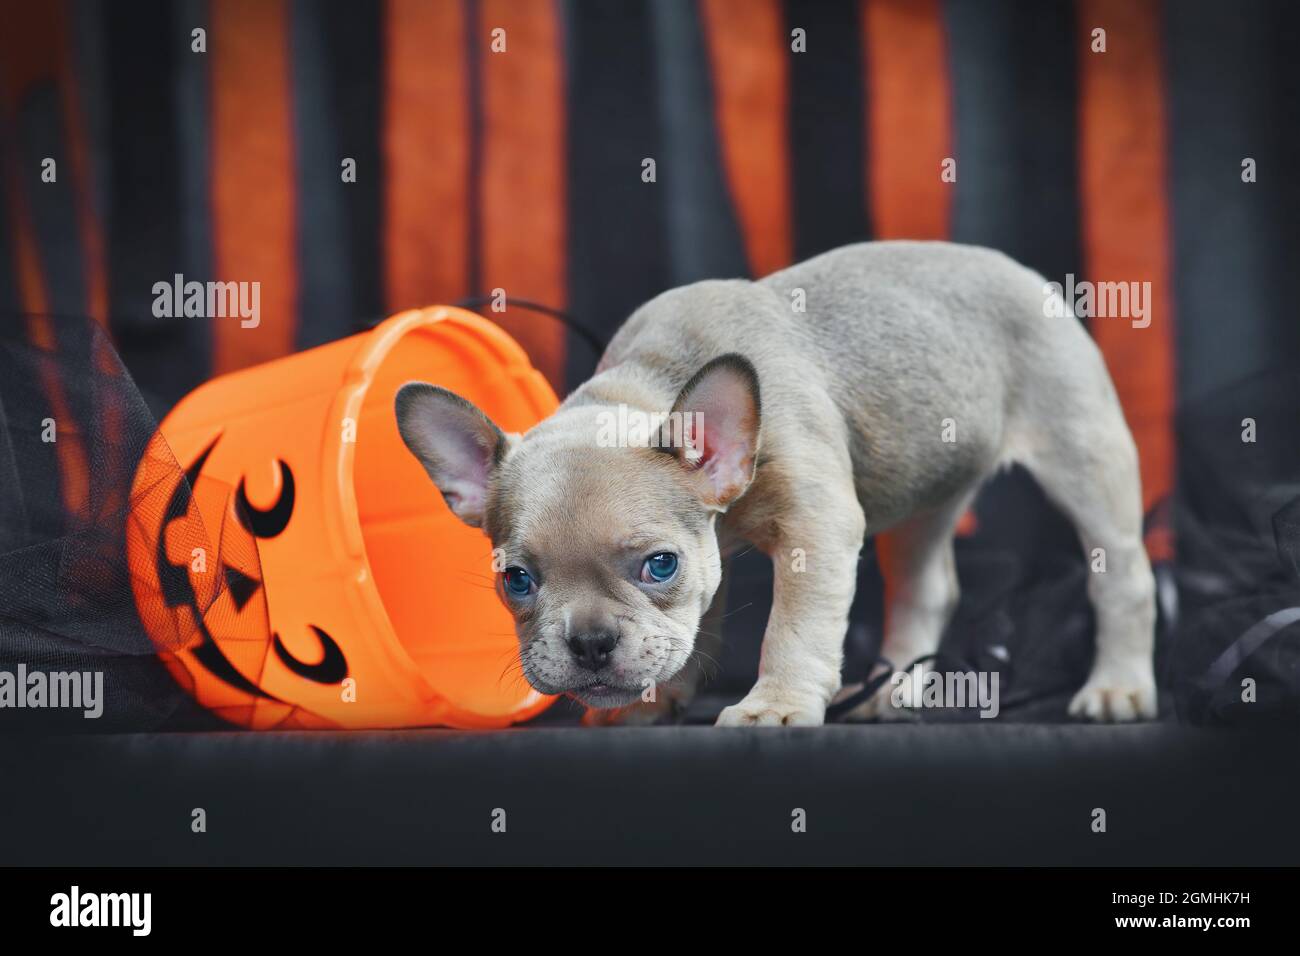 Cute French Bulldog dog puppy with spooky Halloween trick or treat basket in front of black and orange paper streamers Stock Photo